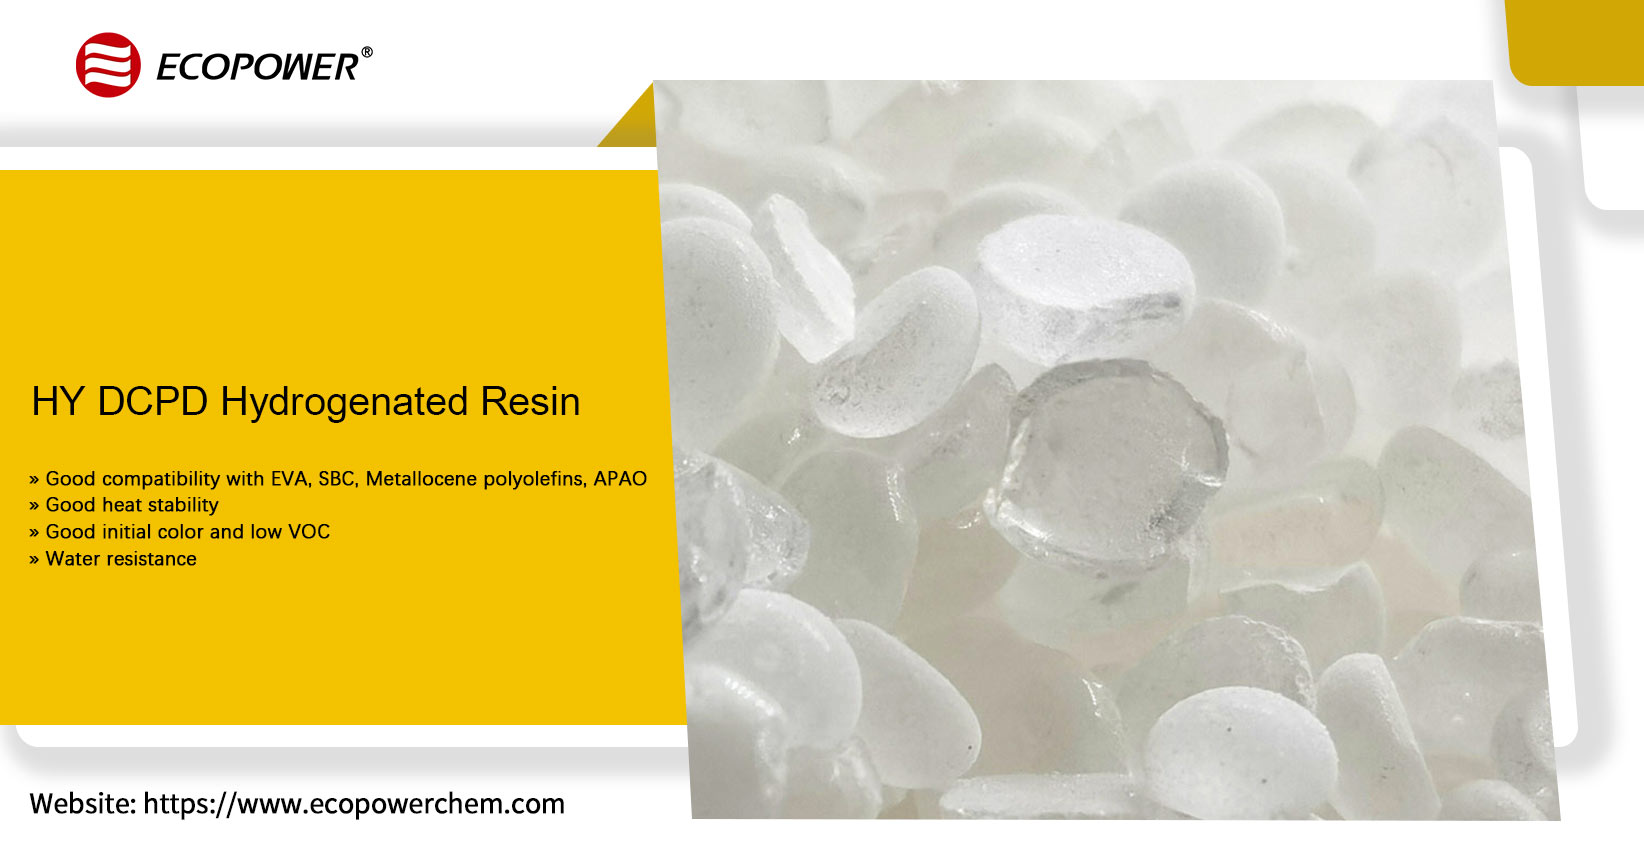 Hot Melt Adhesive Performance with Hydrogenated Resin Additives